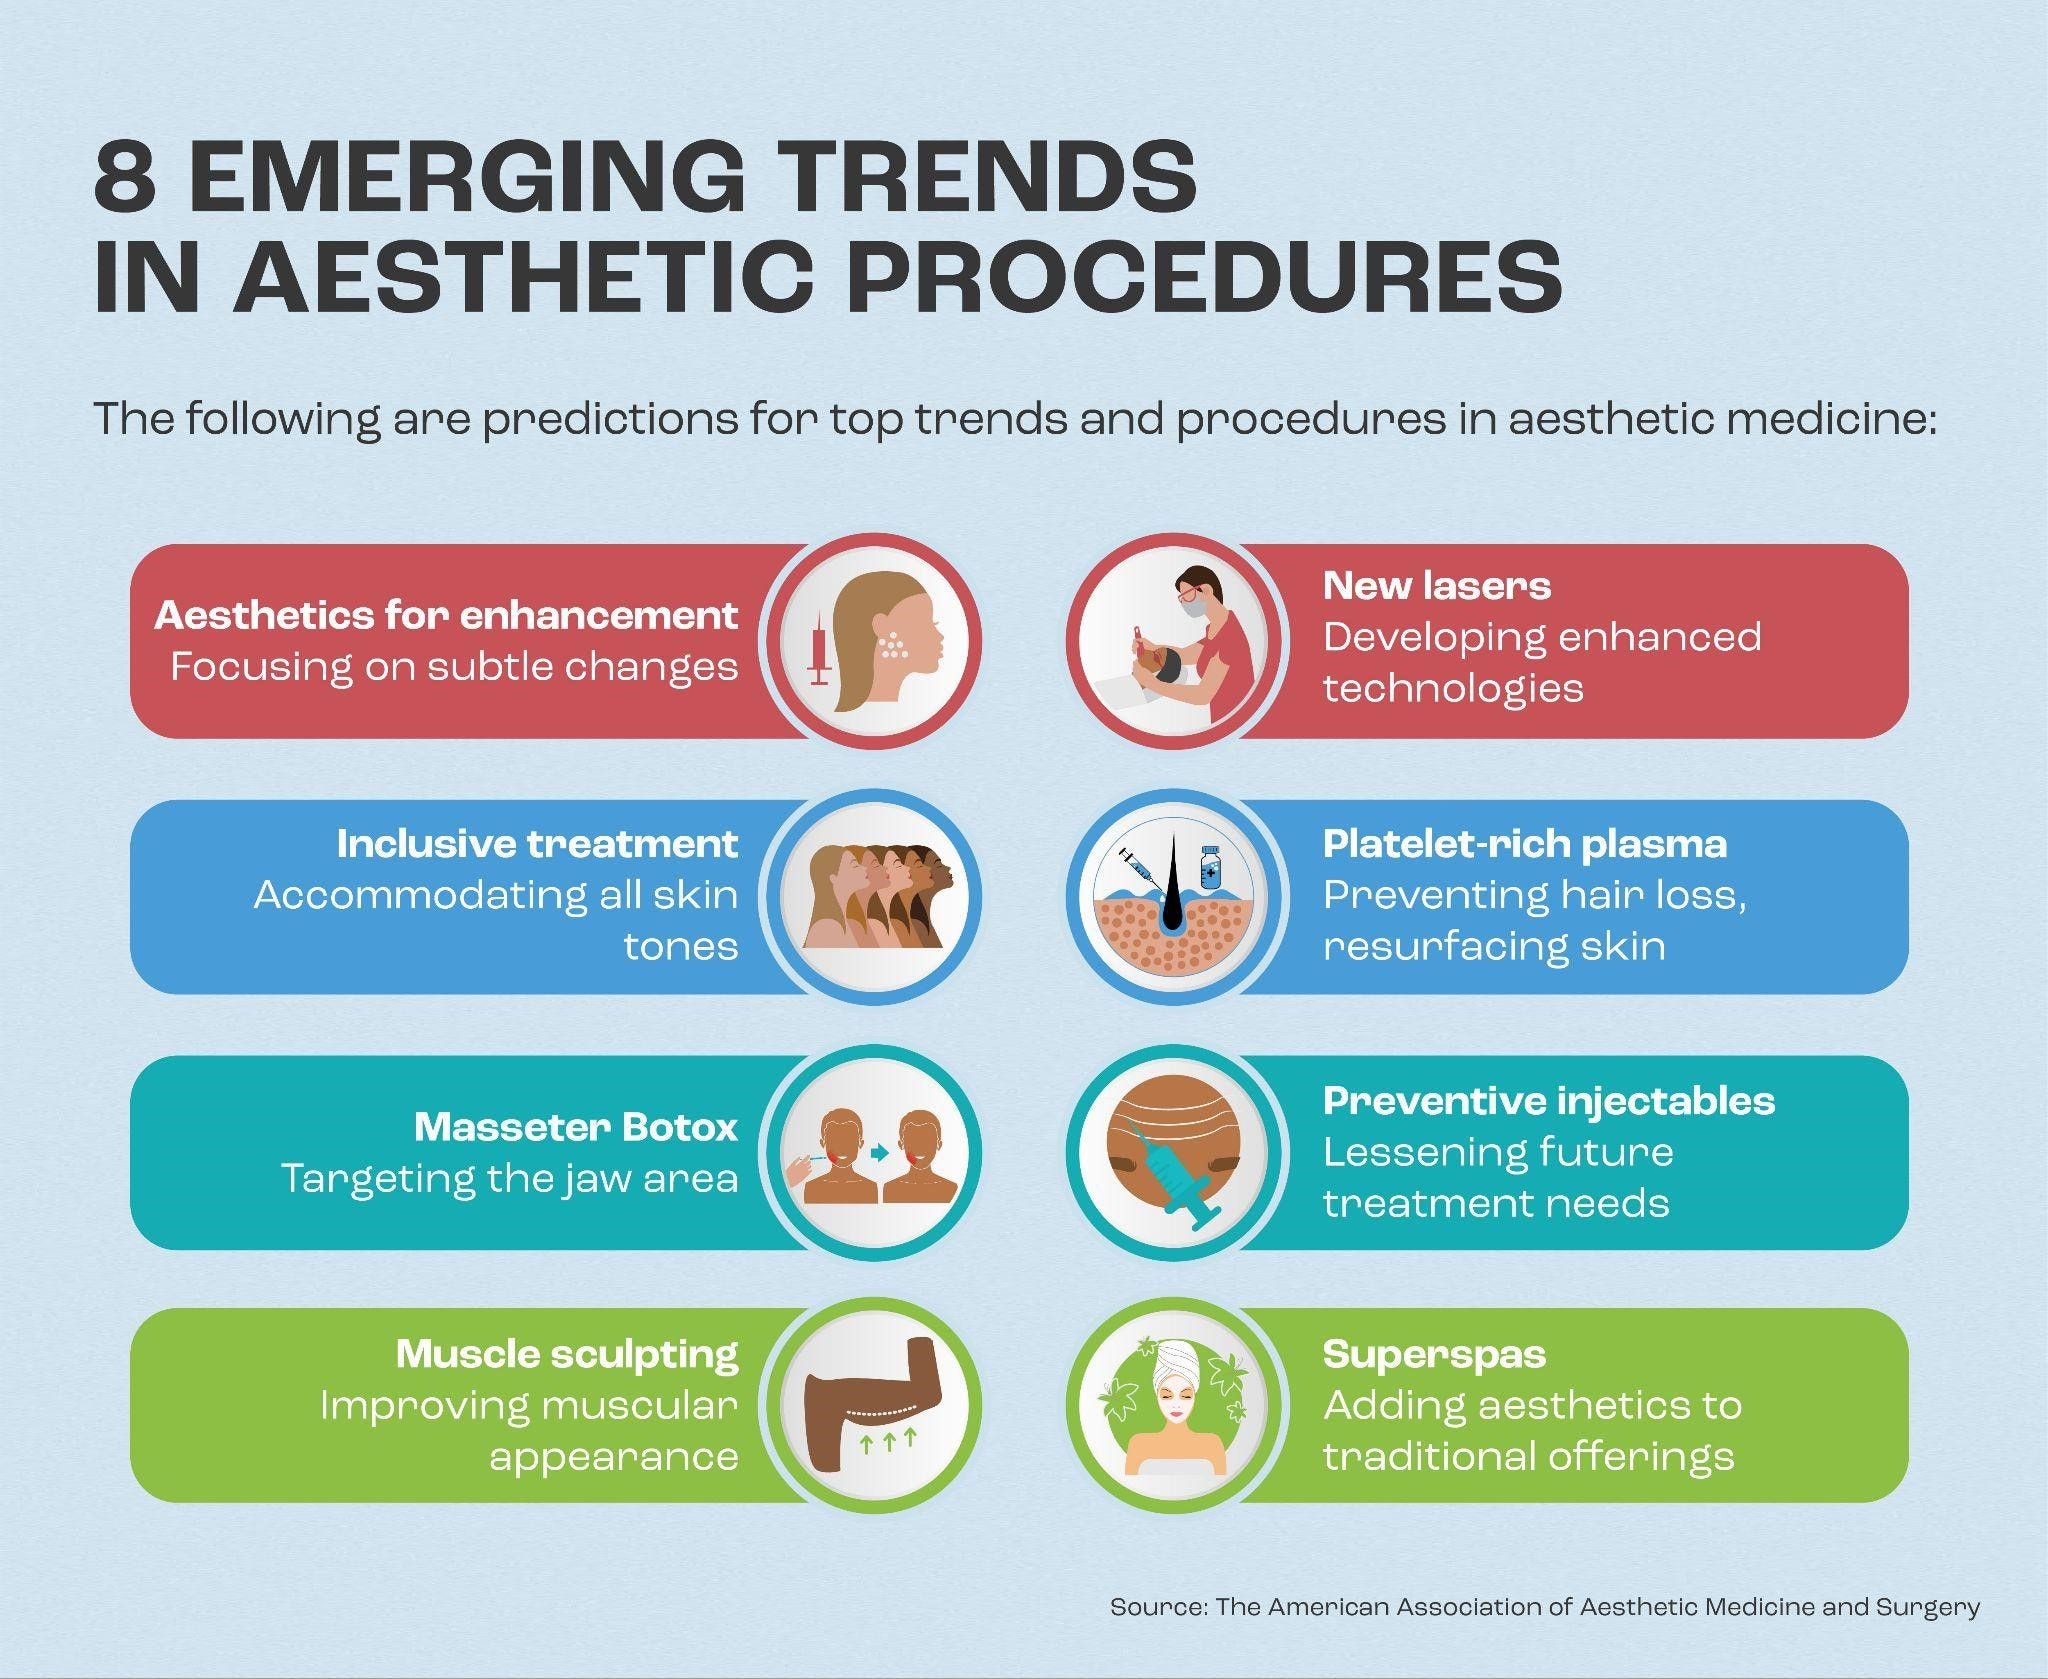 The eight innovations that the American Association of Aesthetic Medicine and Surgery expects will affect the future of aesthetic procedures.